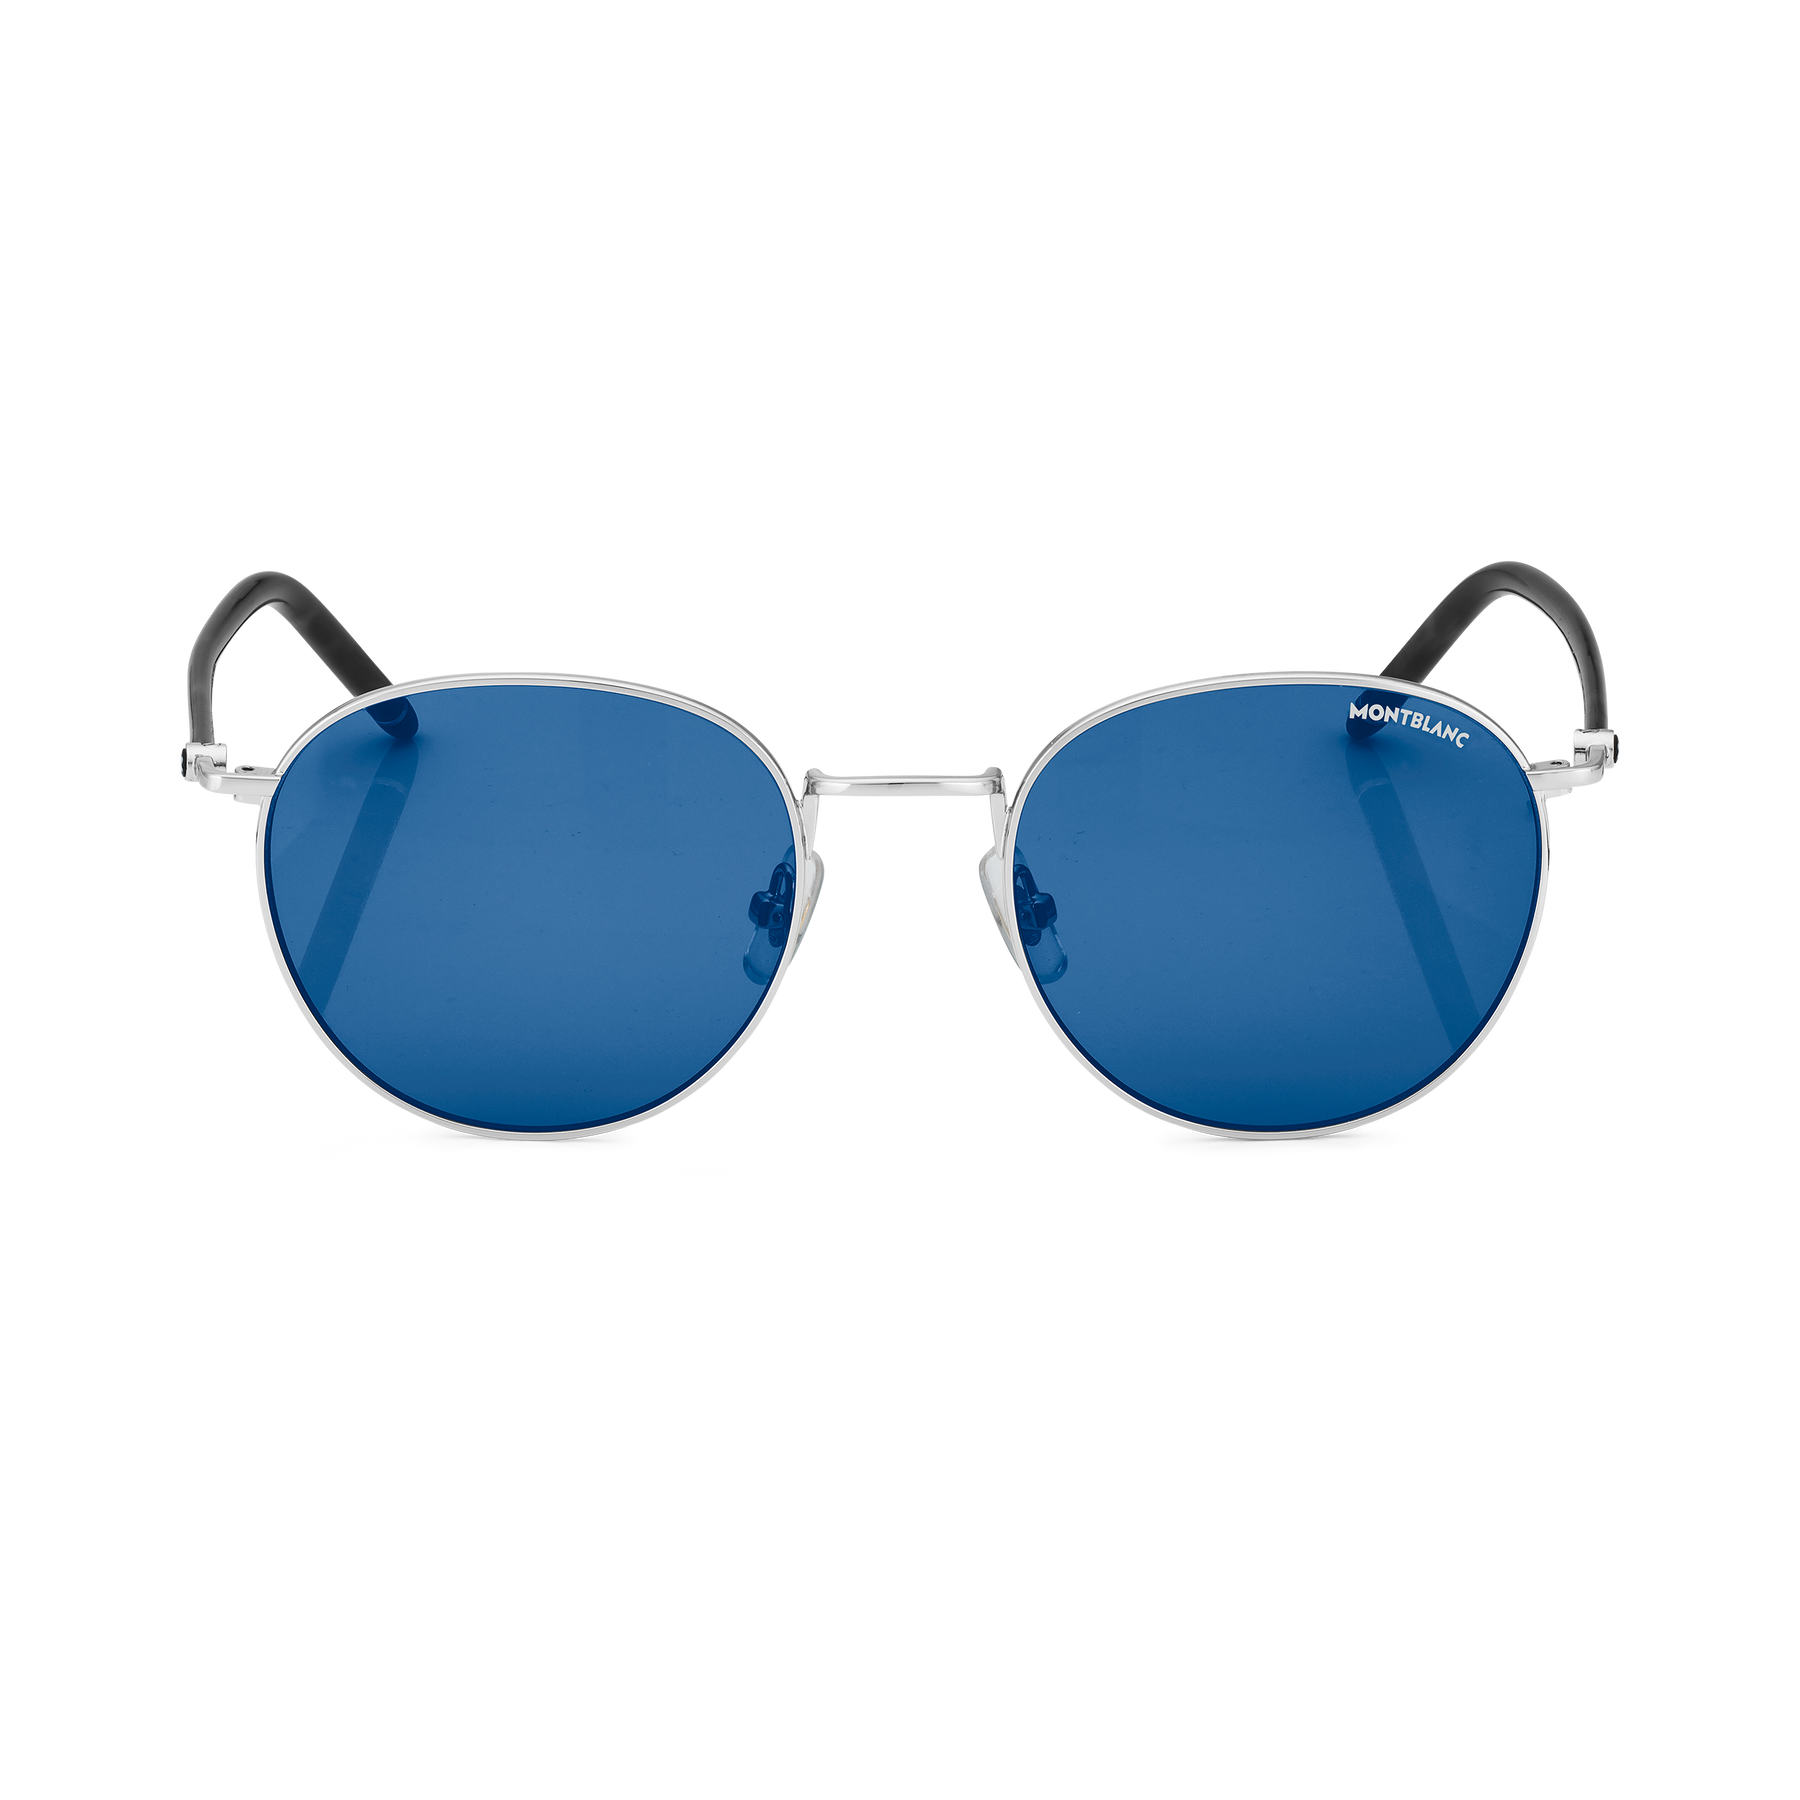 Round Sunglasses with Ruthenium-Colored Metal Frame